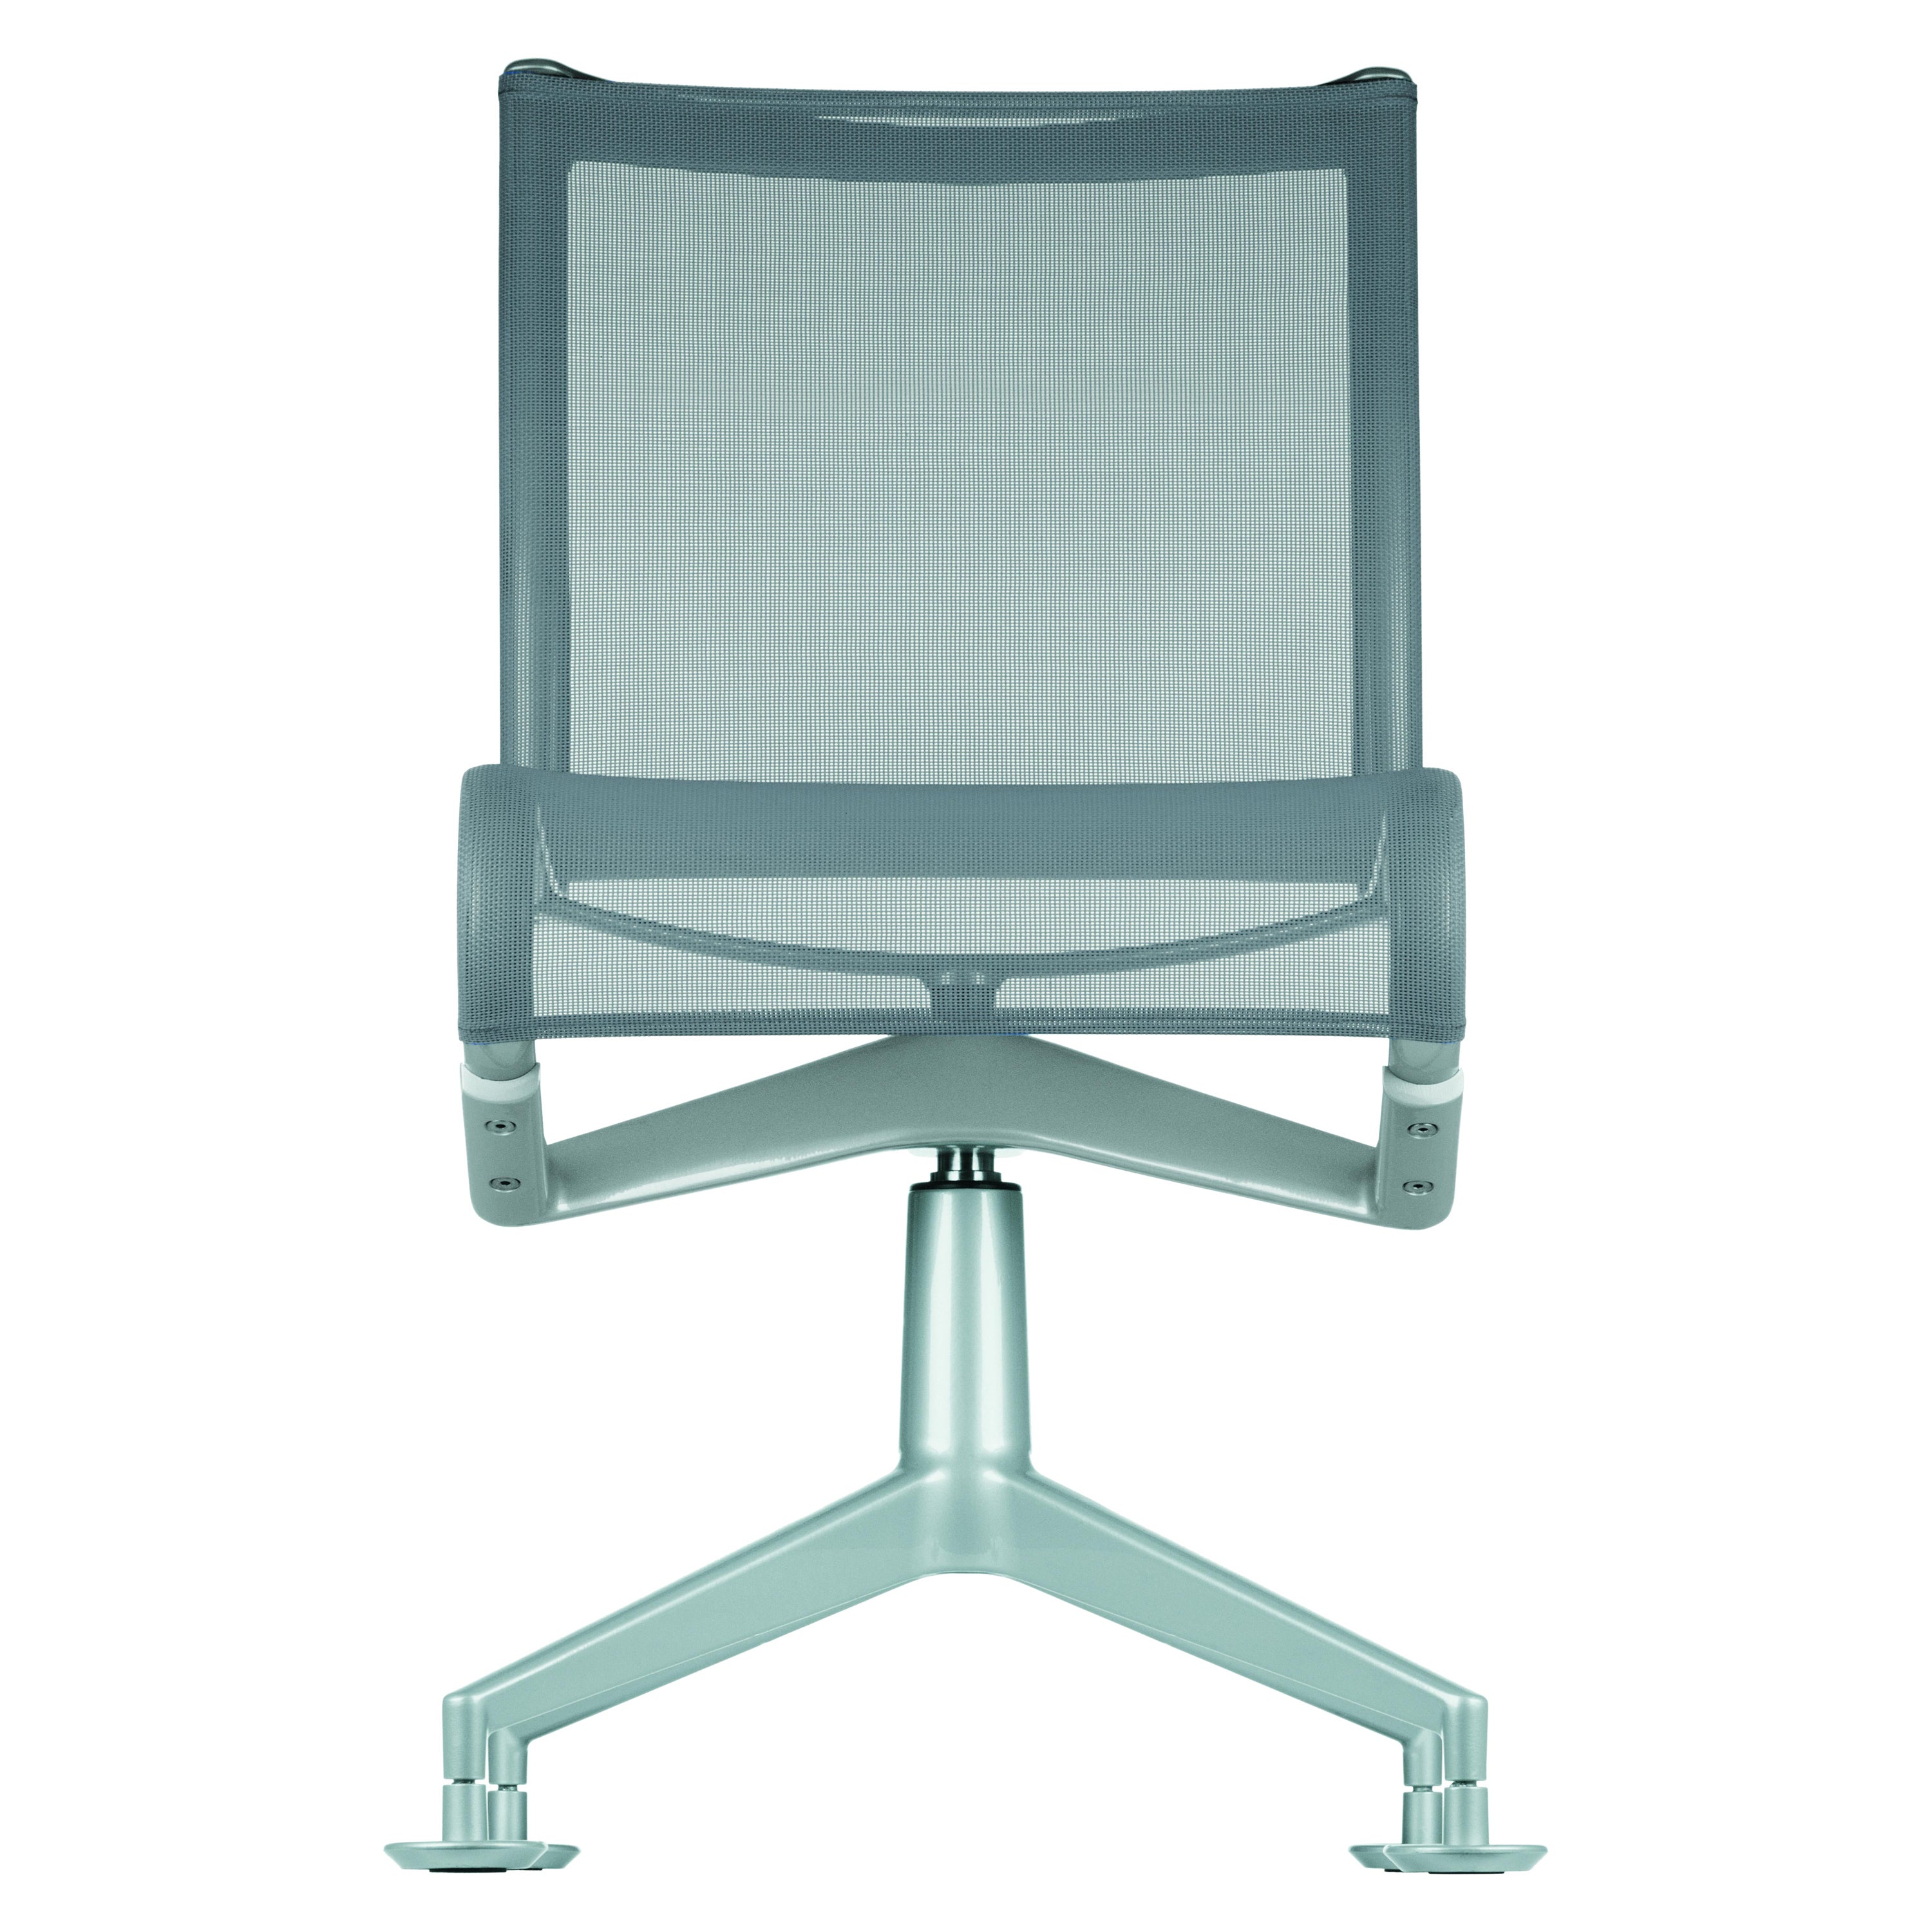 Alias 446 Meetingframe+ Tilt 47 Chair in Grey Mesh with Lacquered Aluminum Frame For Sale